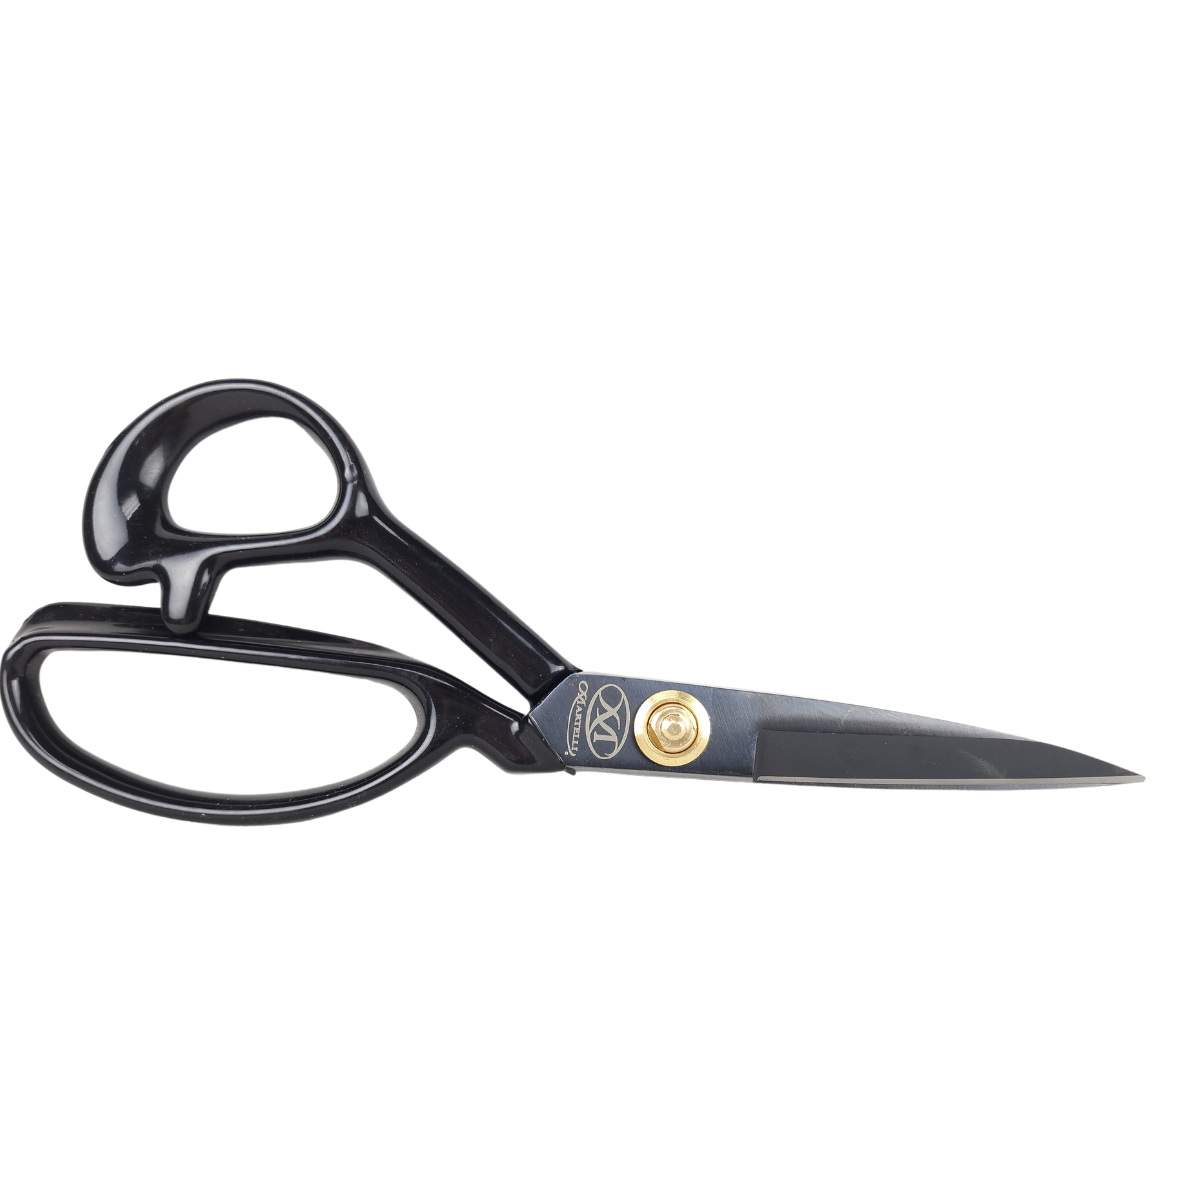 Sew Great 8 Classic Fabric Scissors by Connecting Threads